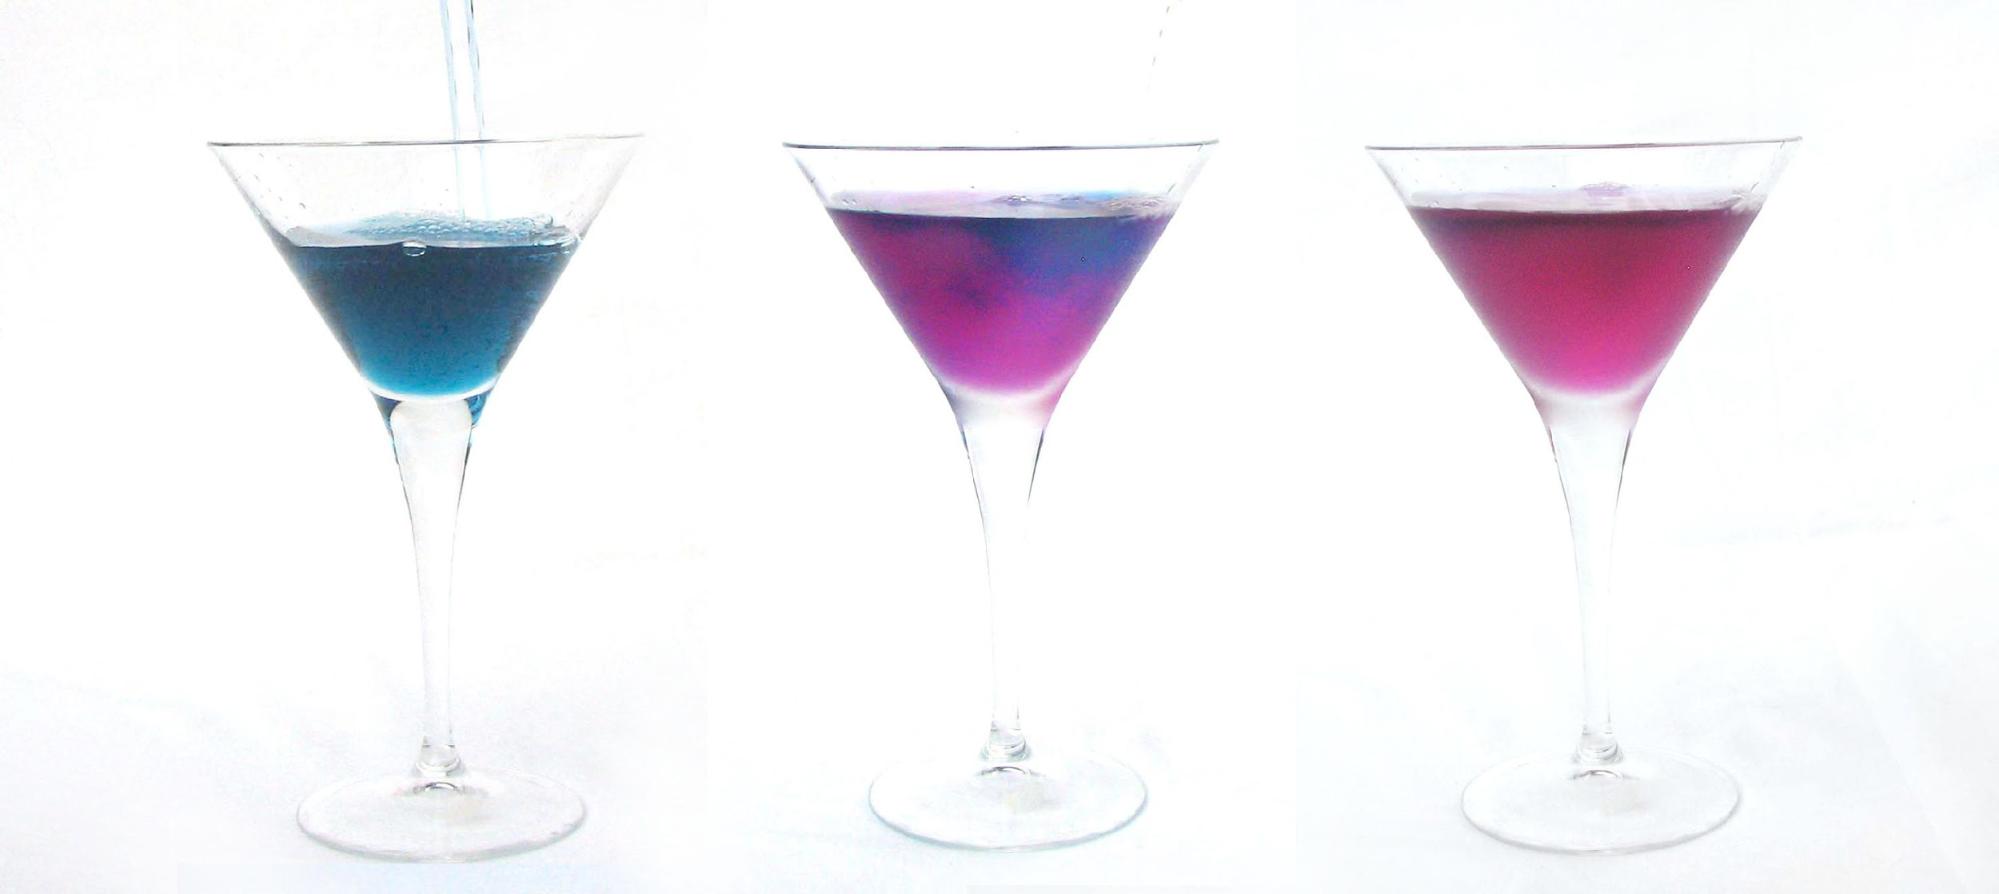 “Magic Martini” to be served at Envoy Restaurant & Lounge